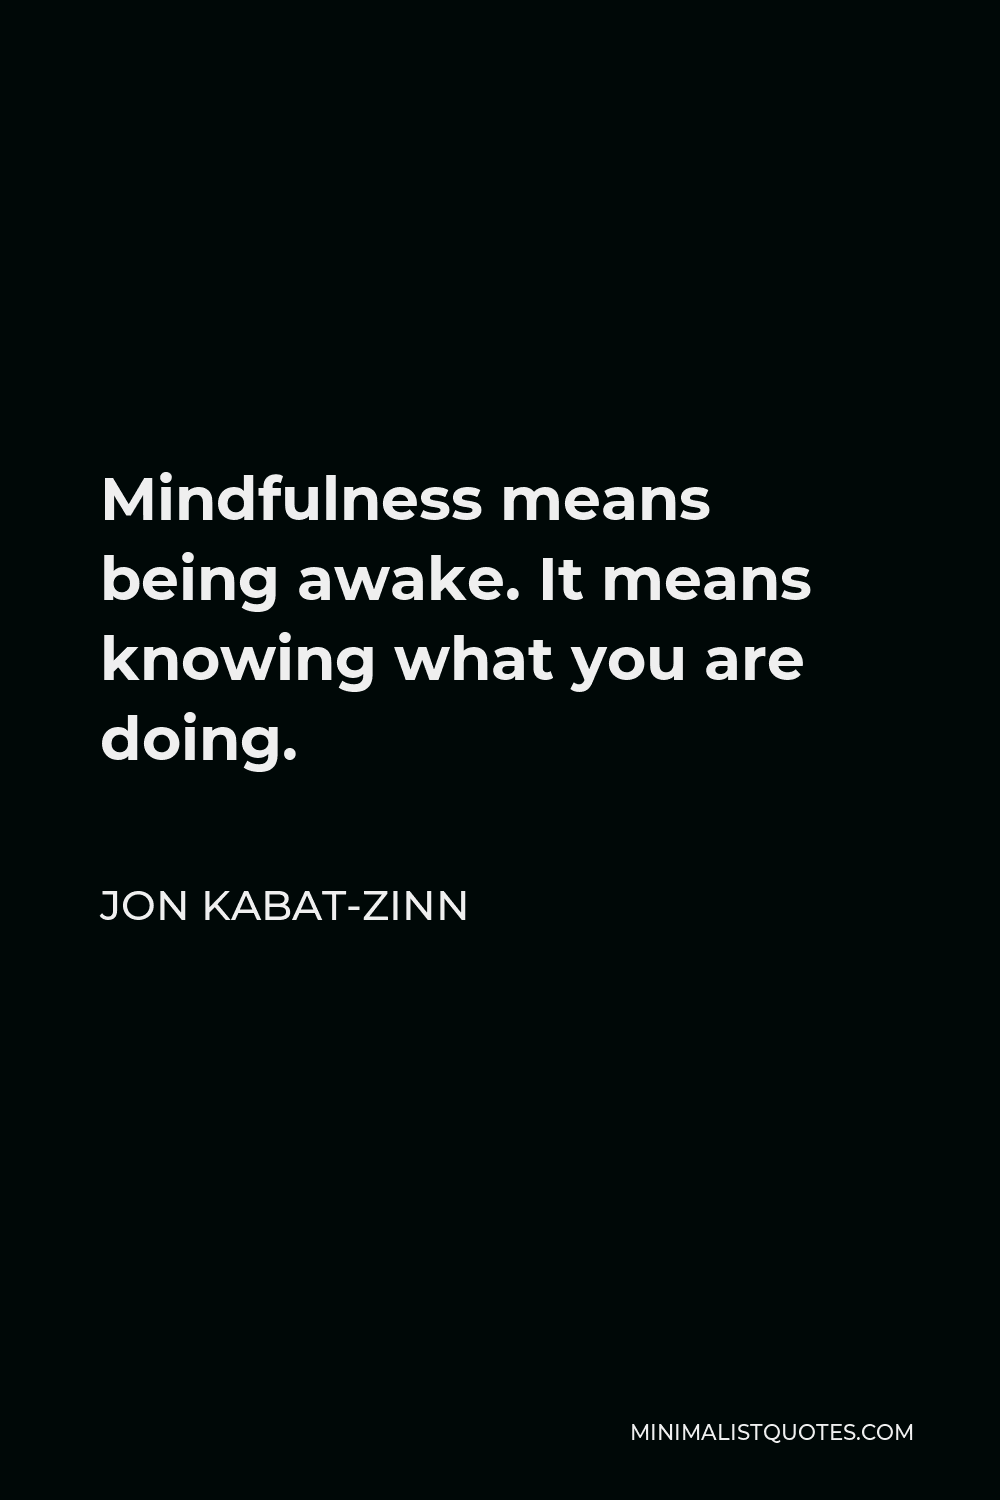 Jon Kabat-Zinn Quote - Mindfulness means being awake. It means knowing what you are doing.